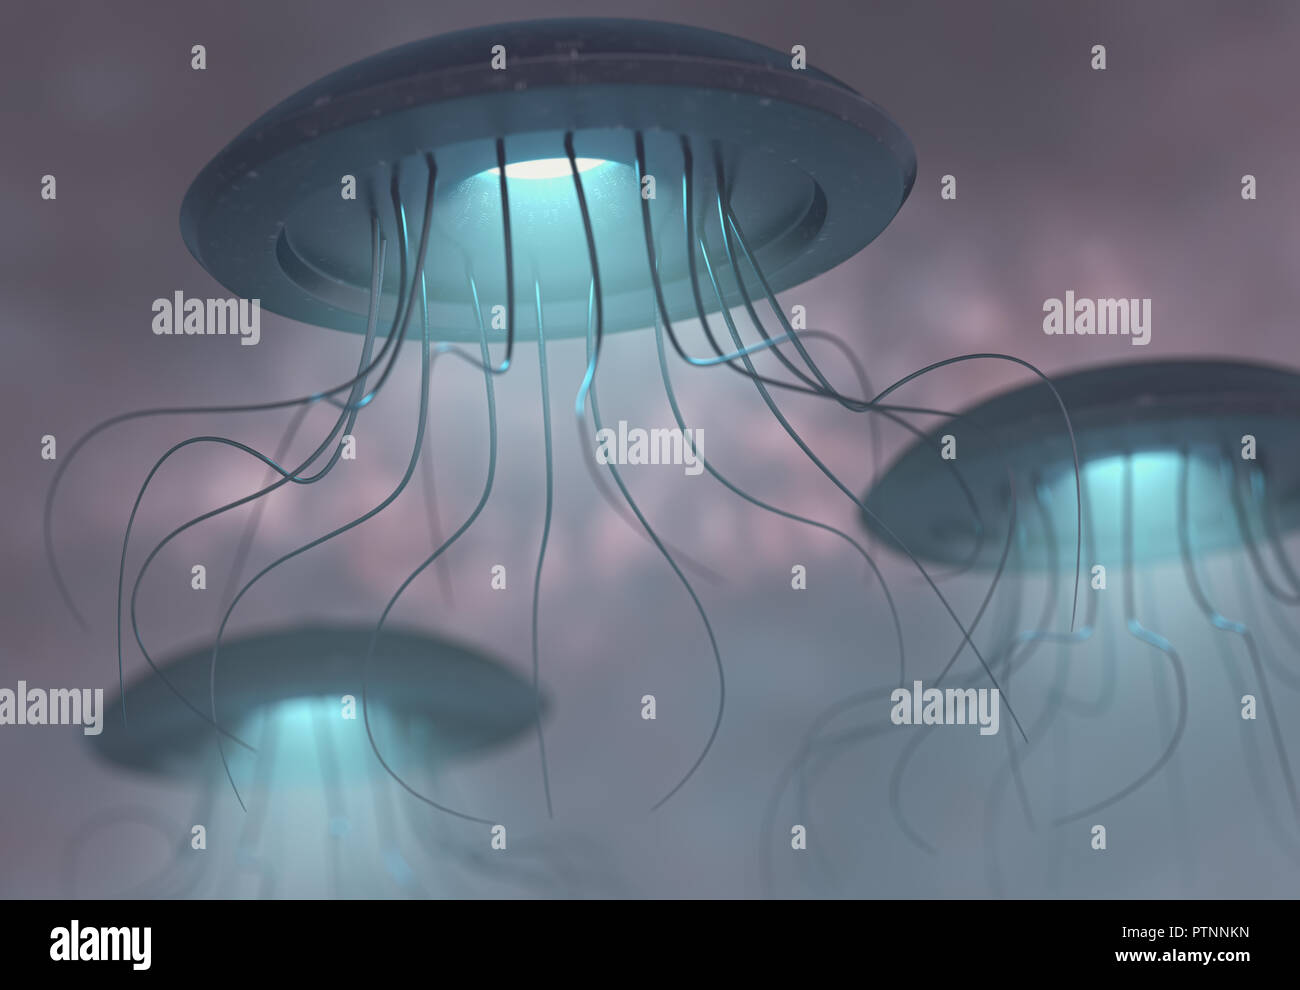 Extraterrestrial spaceship invading planet Earth. Concept image, war of the worlds. Stock Photo